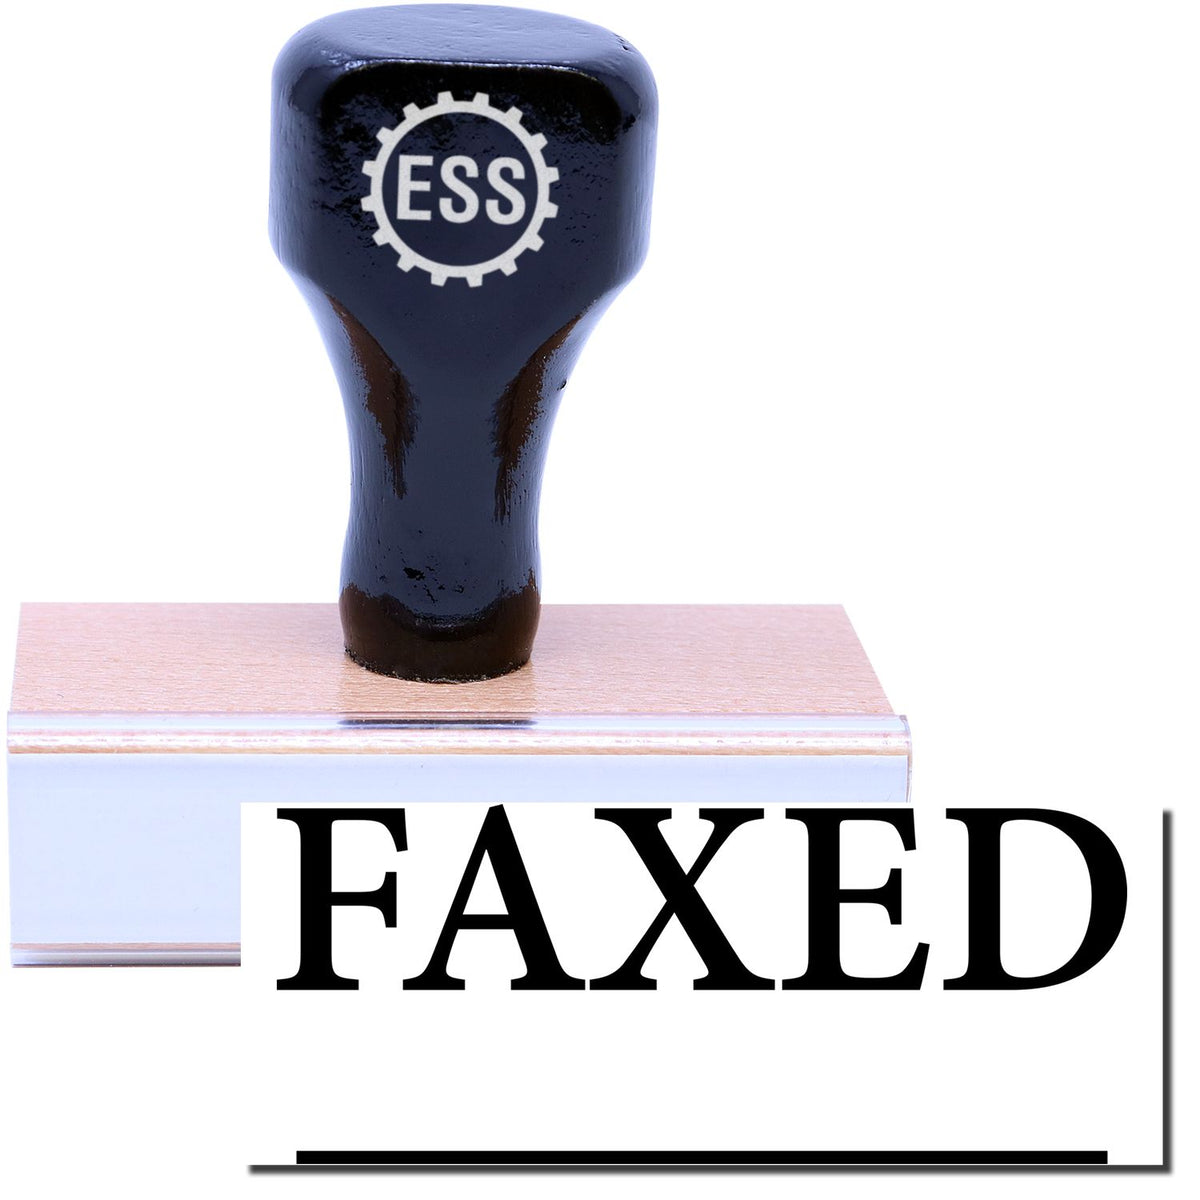 A stock office rubber stamp with a stamped image showing how the text &quot;FAXED&quot; in Times font with a line underneath the text is displayed after stamping.